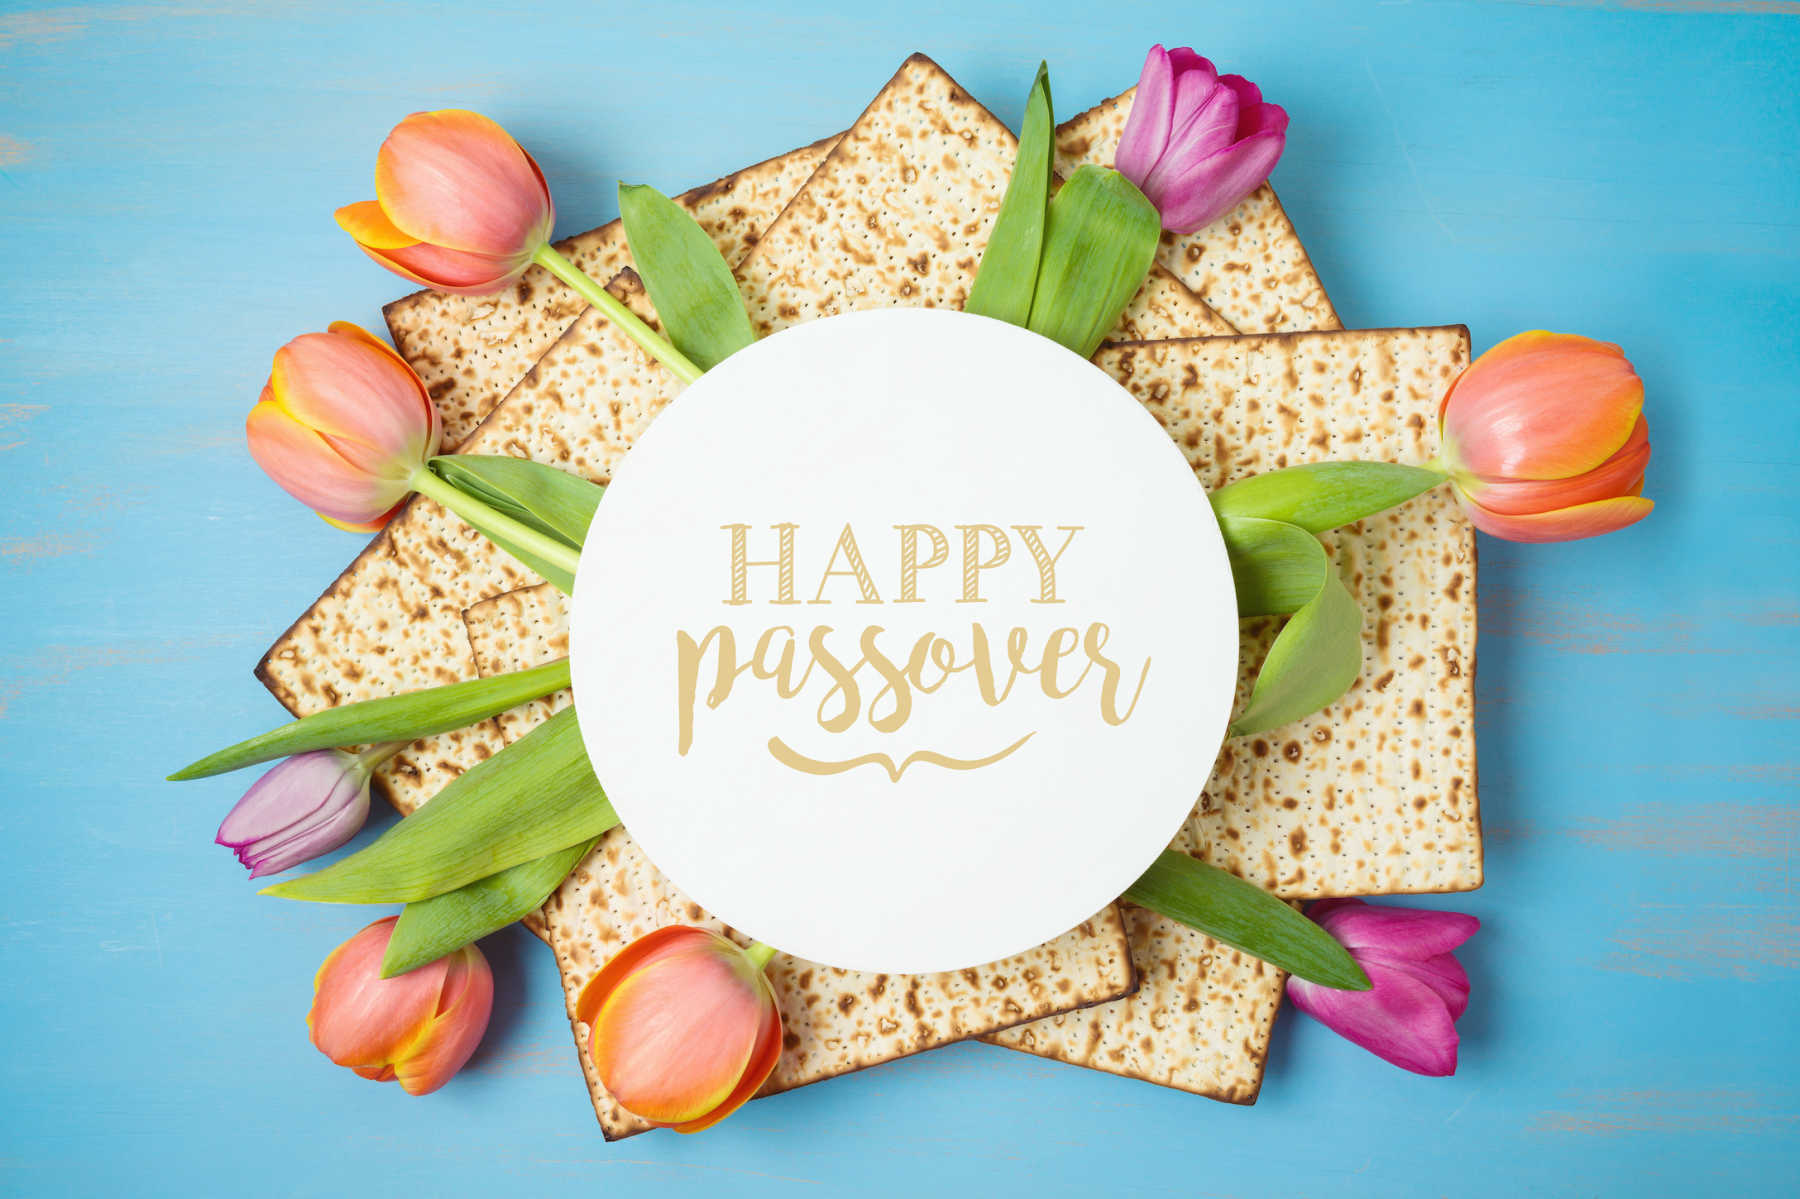 20 MessFree Passover Crafts To Keep the Kids Busy